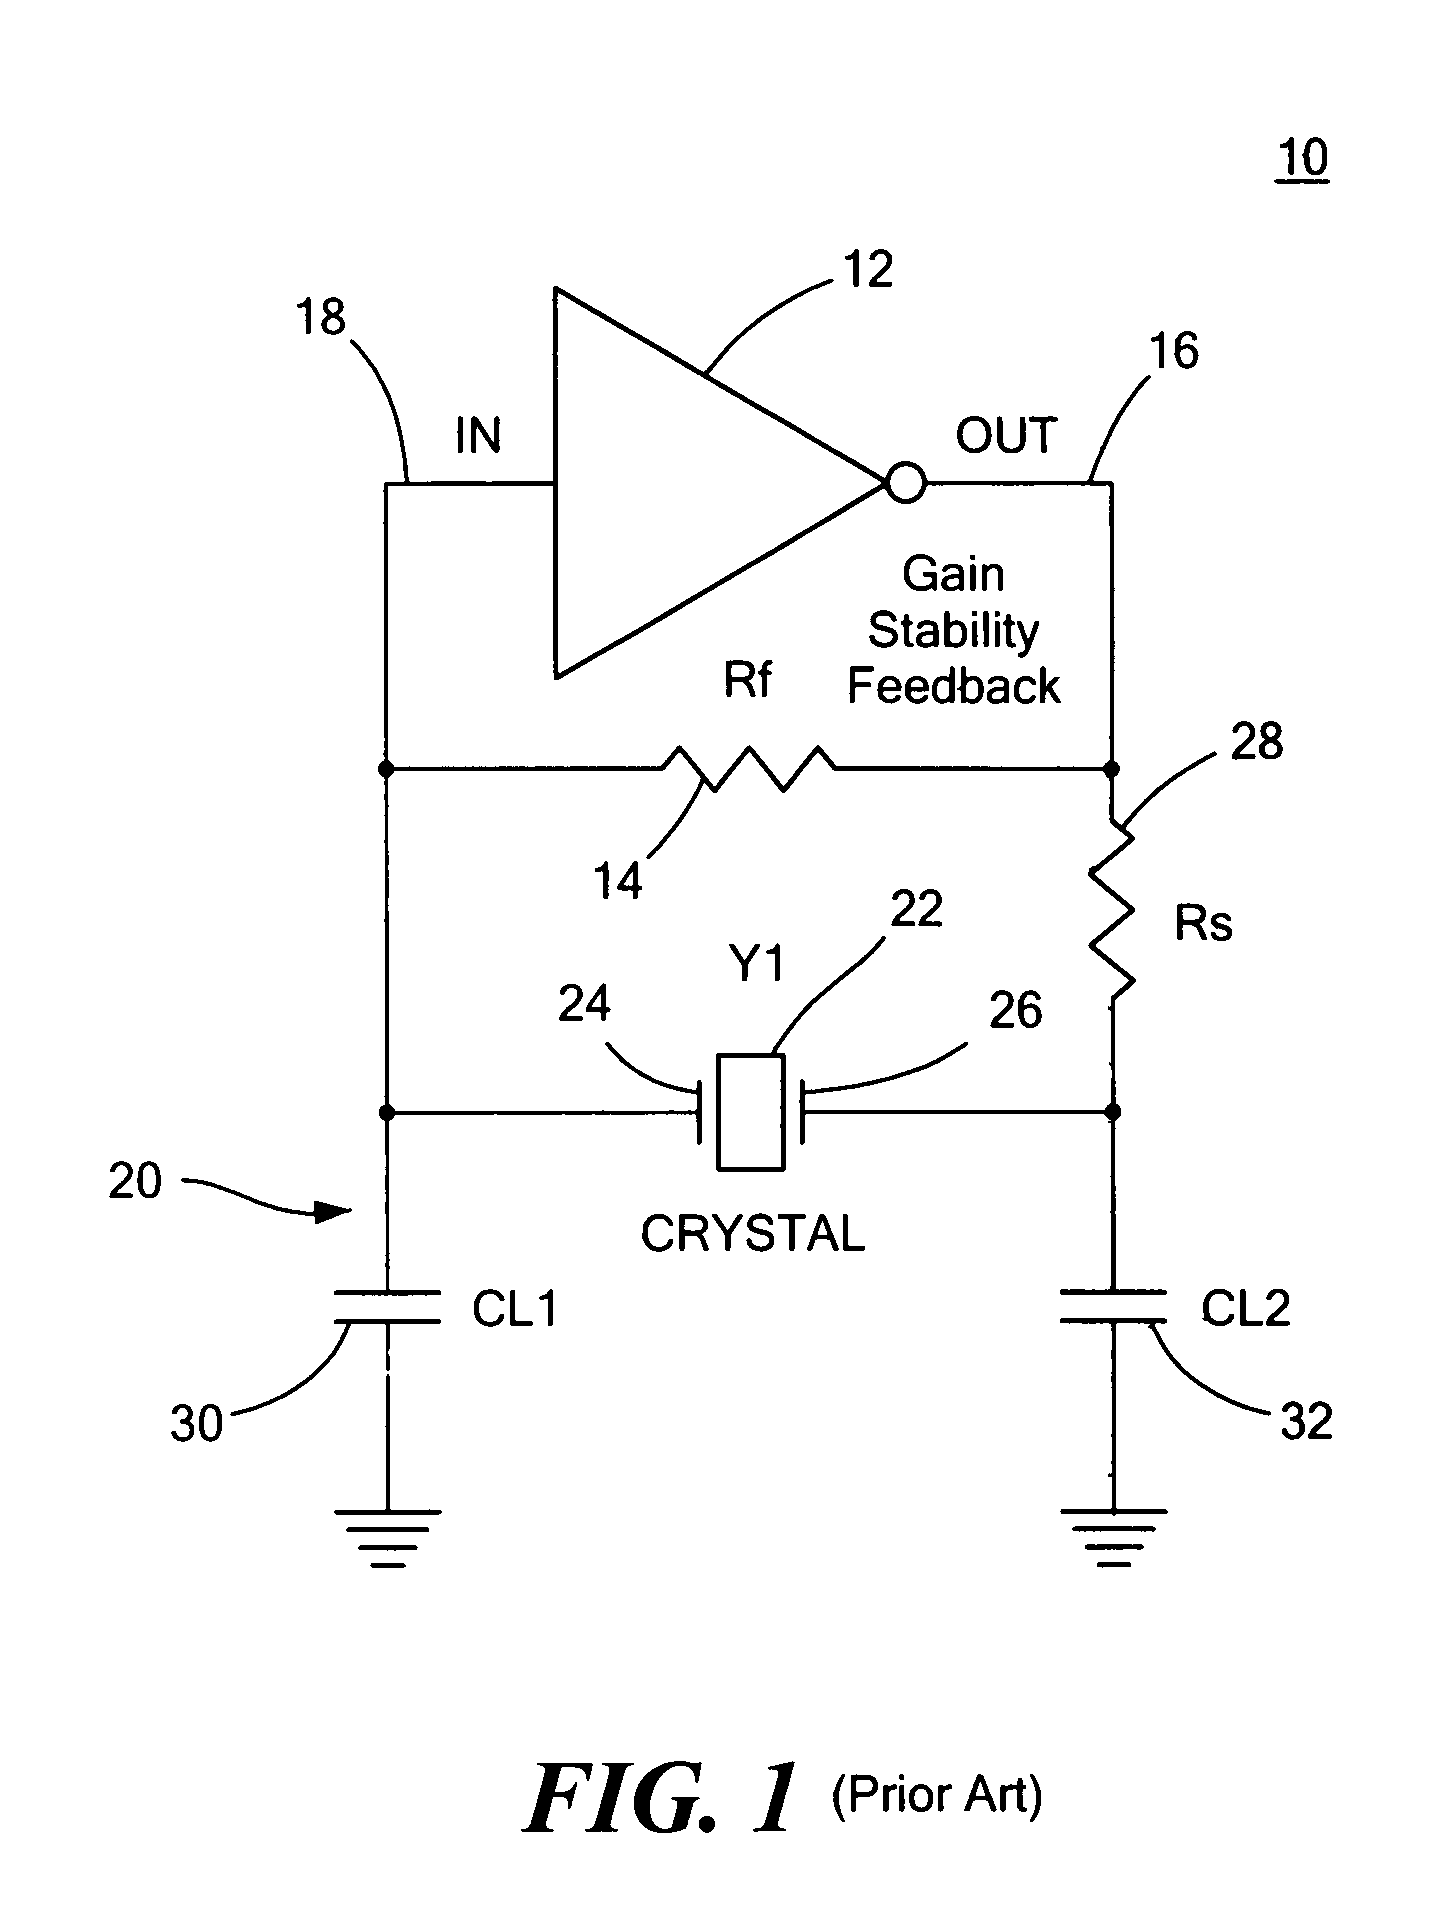 Crystal oscillator with variable-gain and variable-output-impedance inverter system